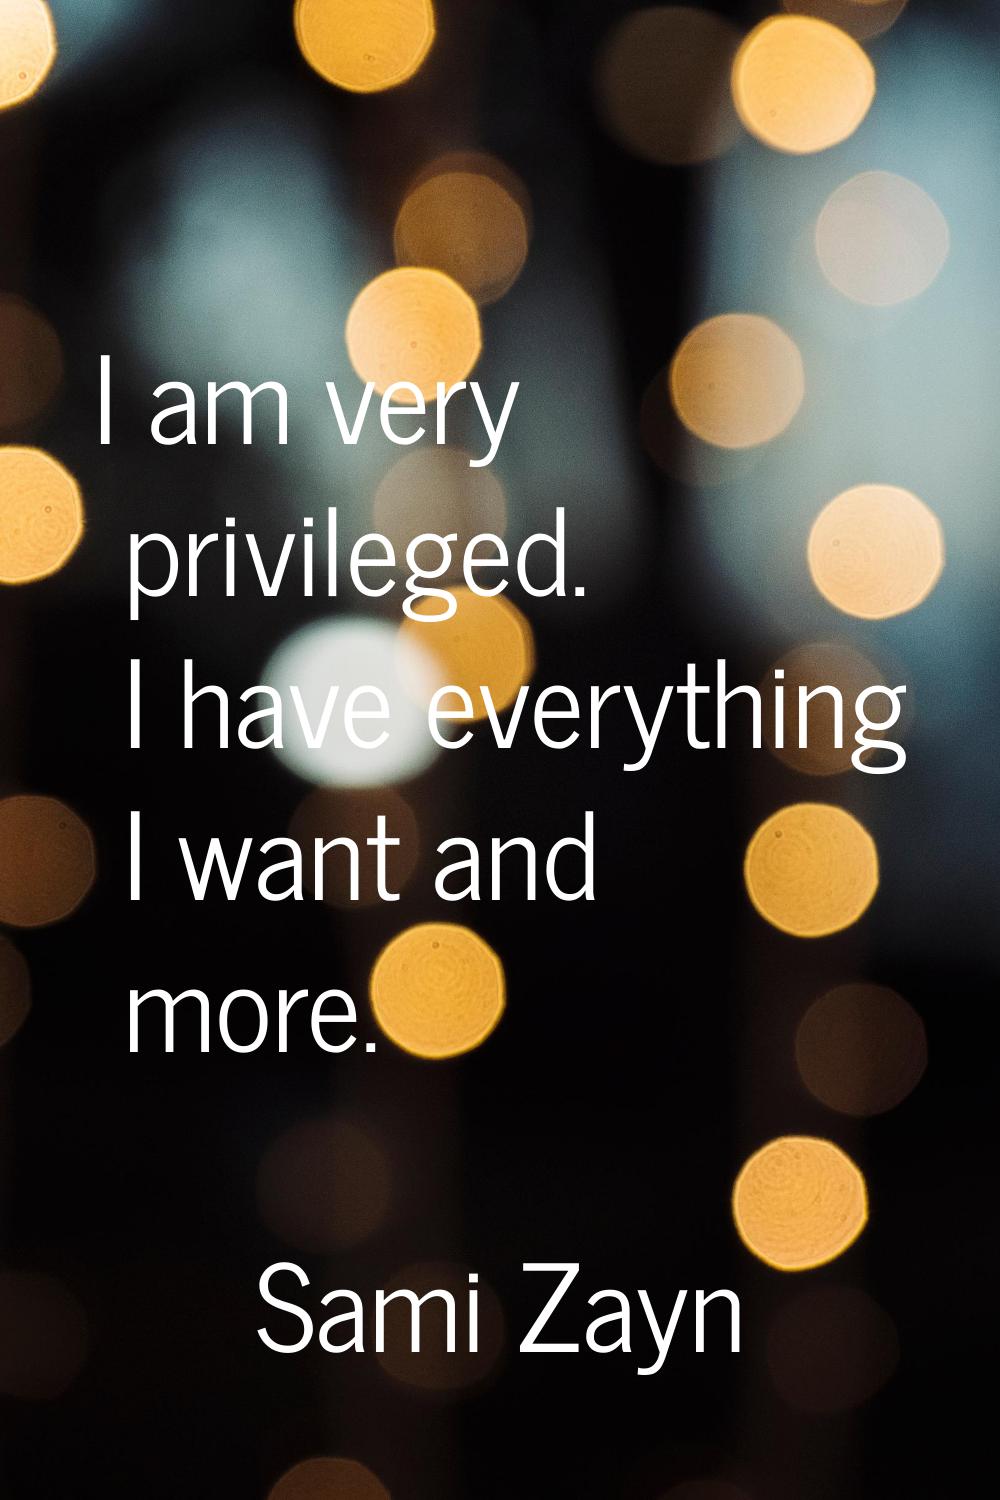 I am very privileged. I have everything I want and more.